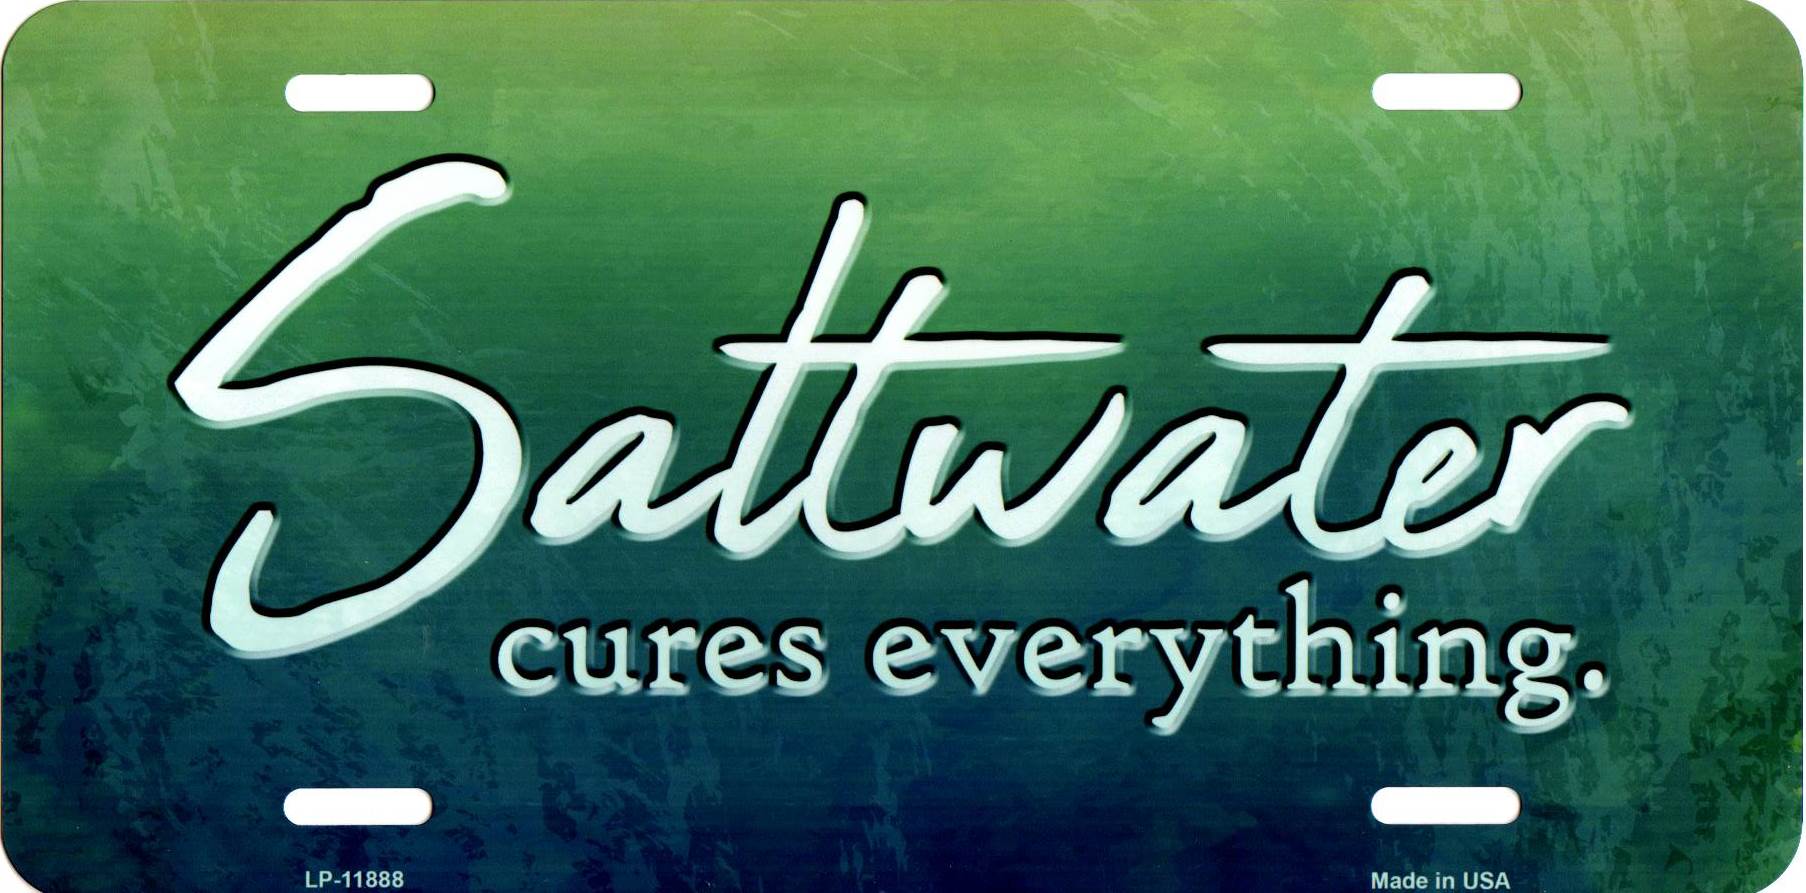 Saltwater Cures Everything Metal LICENSE PLATE